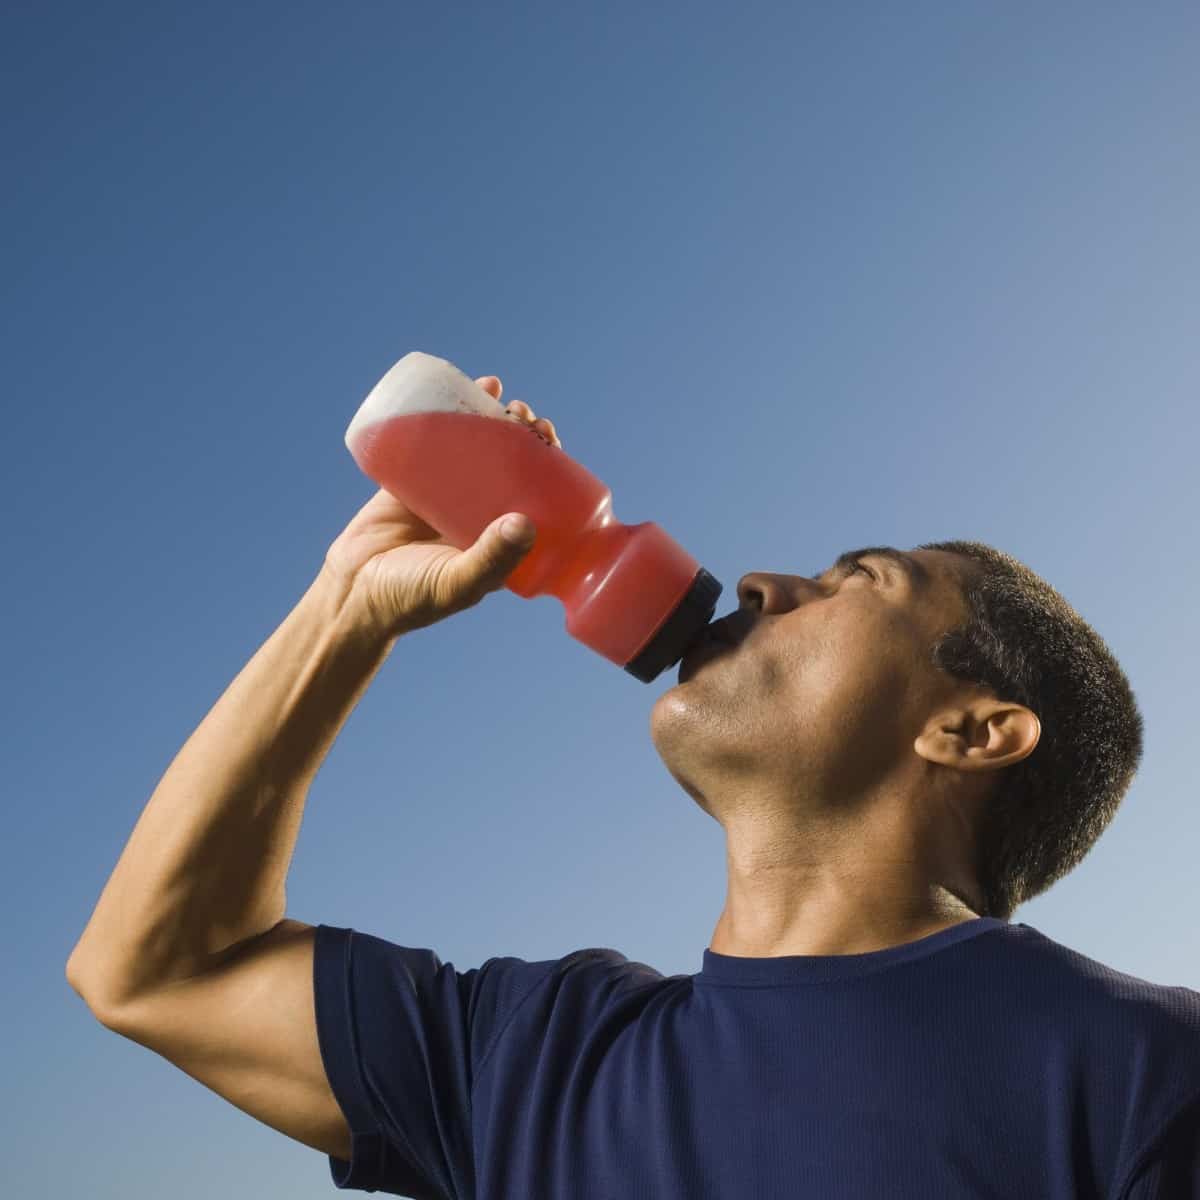 Energy drinks after a workout
